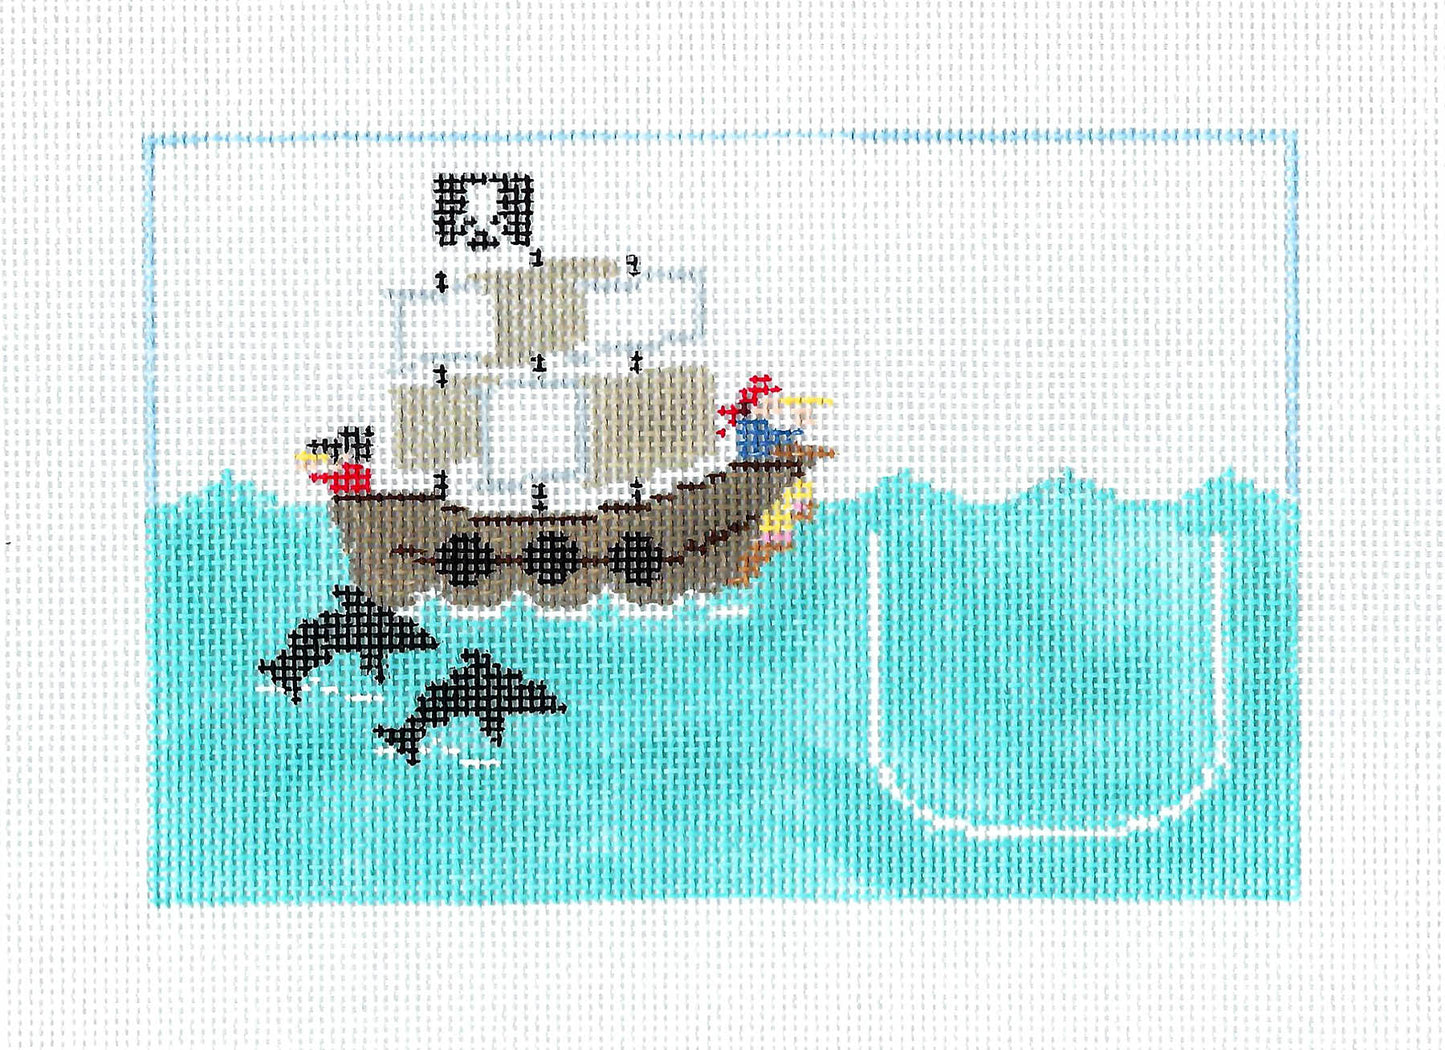 Tooth Fairy Canvas ~ Tooth Fairy Pillow PIRATE SHIP  2 Canvas SET, HP Needlepoint Canvas by Kathy Schenkel